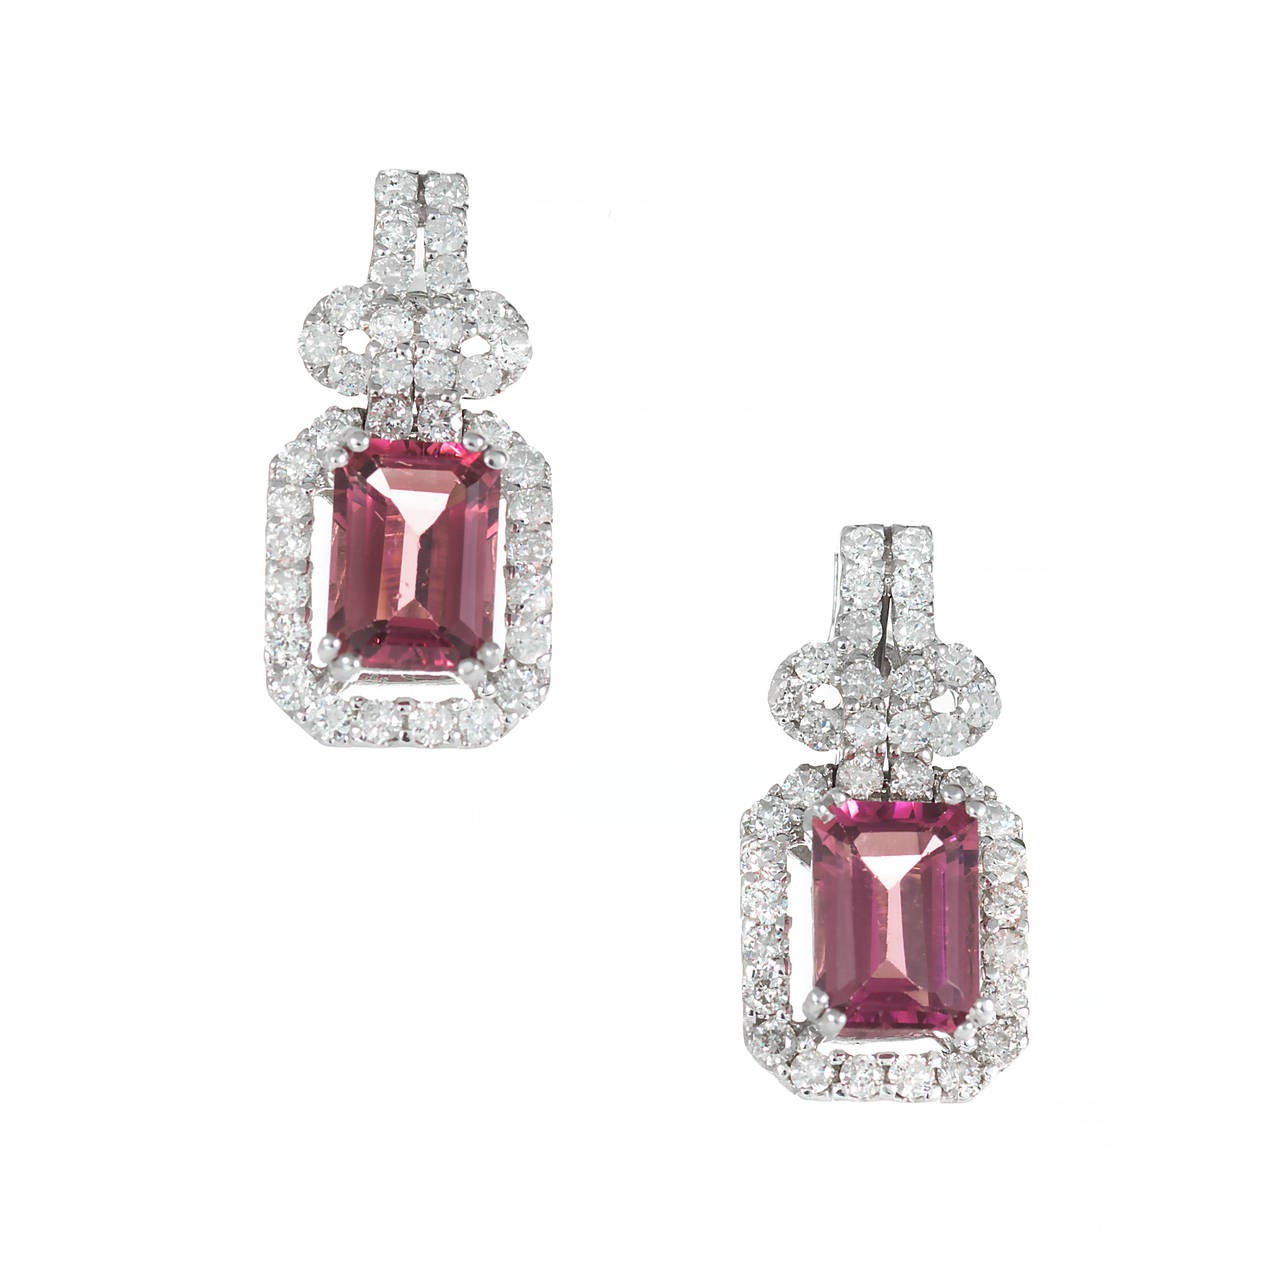 Very nice simple full cut diamond dangle earrings in 18k white gold with Emerald cut pink Tourmaline.

2 Emerald cut pink Tourmaline, approx. total weight 1.90cts, VS
72 round full cut diamonds, approx. total weight .75cts, H, SI
18k white